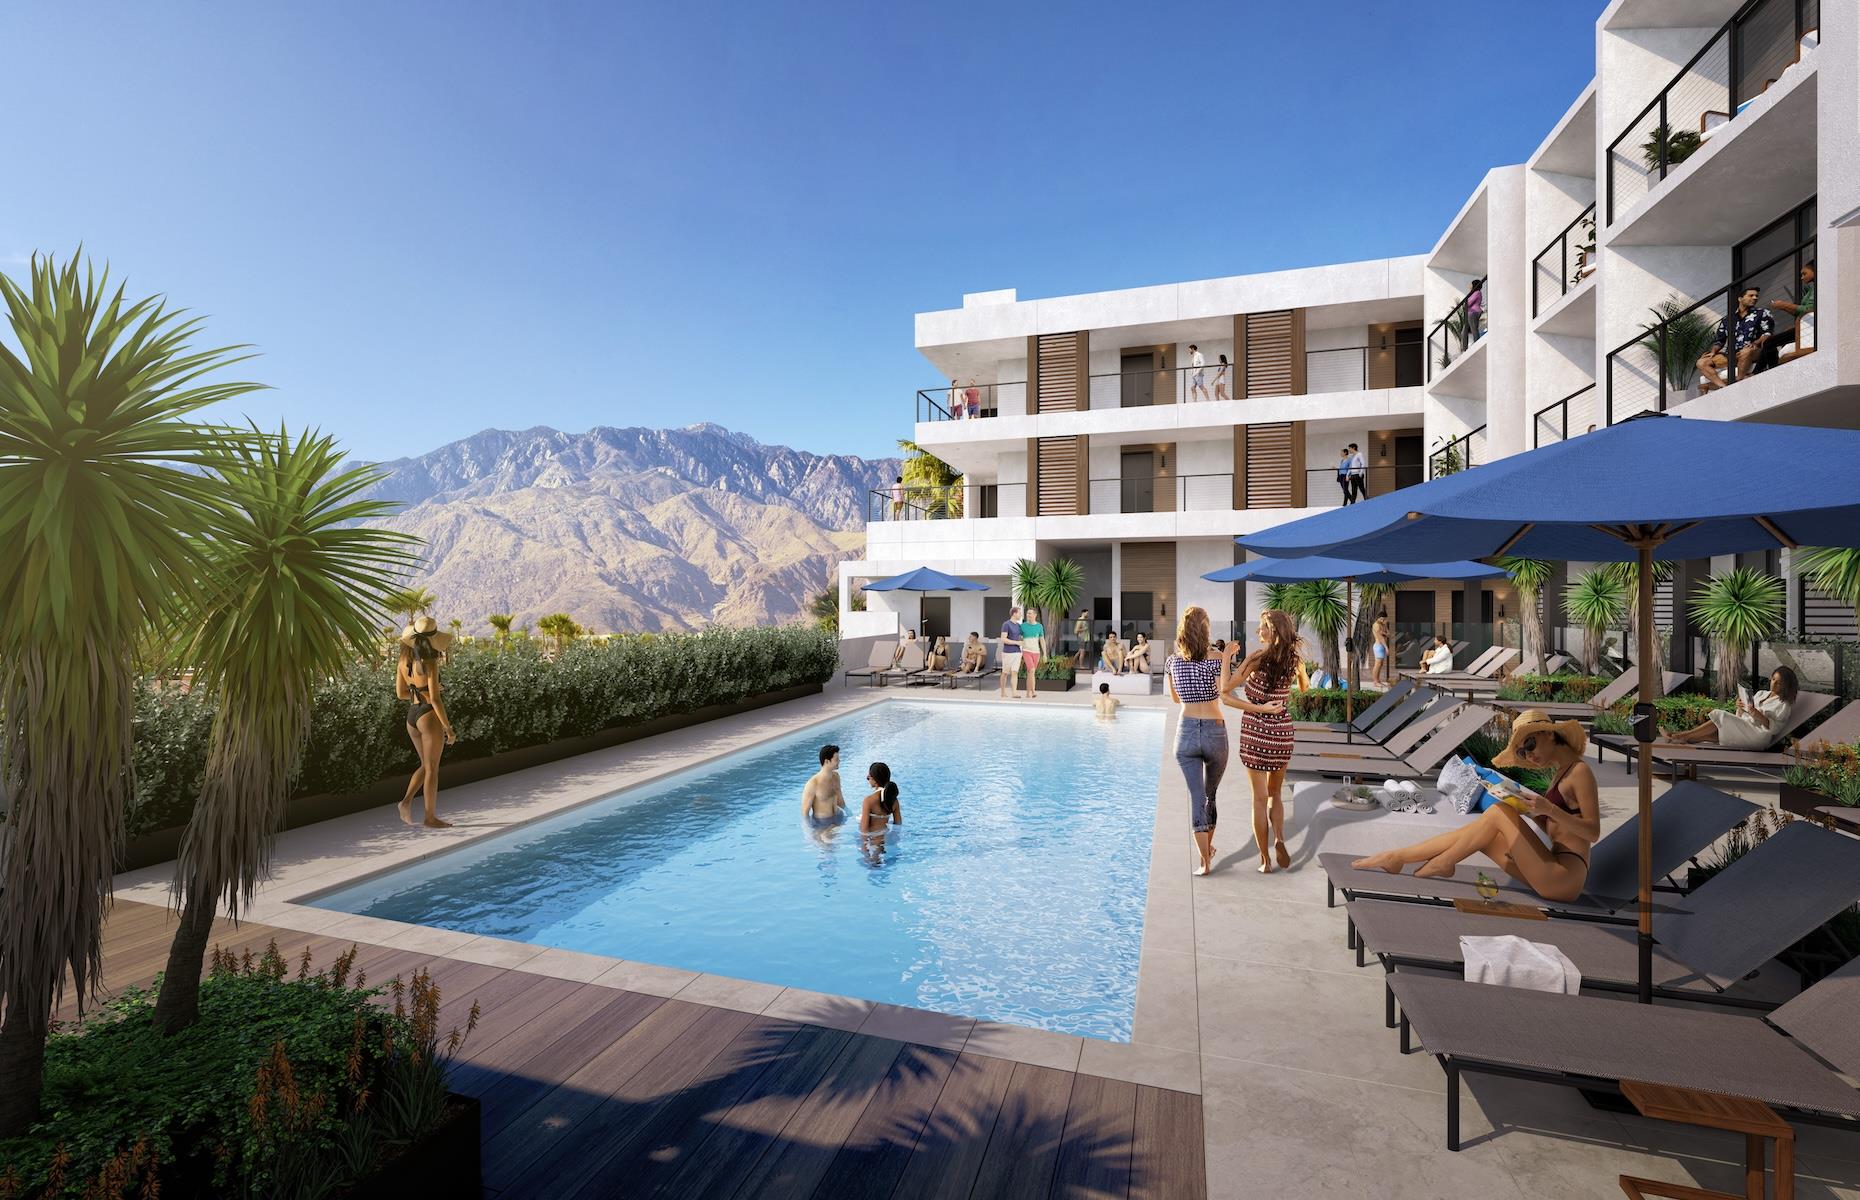 <p>Palm Springs isn’t short of chic places to stay and its style credentials continue to grow as Thompson Hotels opens its second Californian property this May in the desert enclave’s downtown Design District. The brand’s signature sleek decor will be complemented with earthy hues and vivid pops of color with an overarching Rat Pack-era style vision. It’s a biggie, with 168 "bungalow-inspired" rooms and suites, 35,000 square feet of dining and retail space (including a vast Napa Valley wine tasting room), a gym, ballroom and spa. Balconies and a pool area will offer the classic Palm Spring views of the San Jacinto Mountains to pose by.</p>